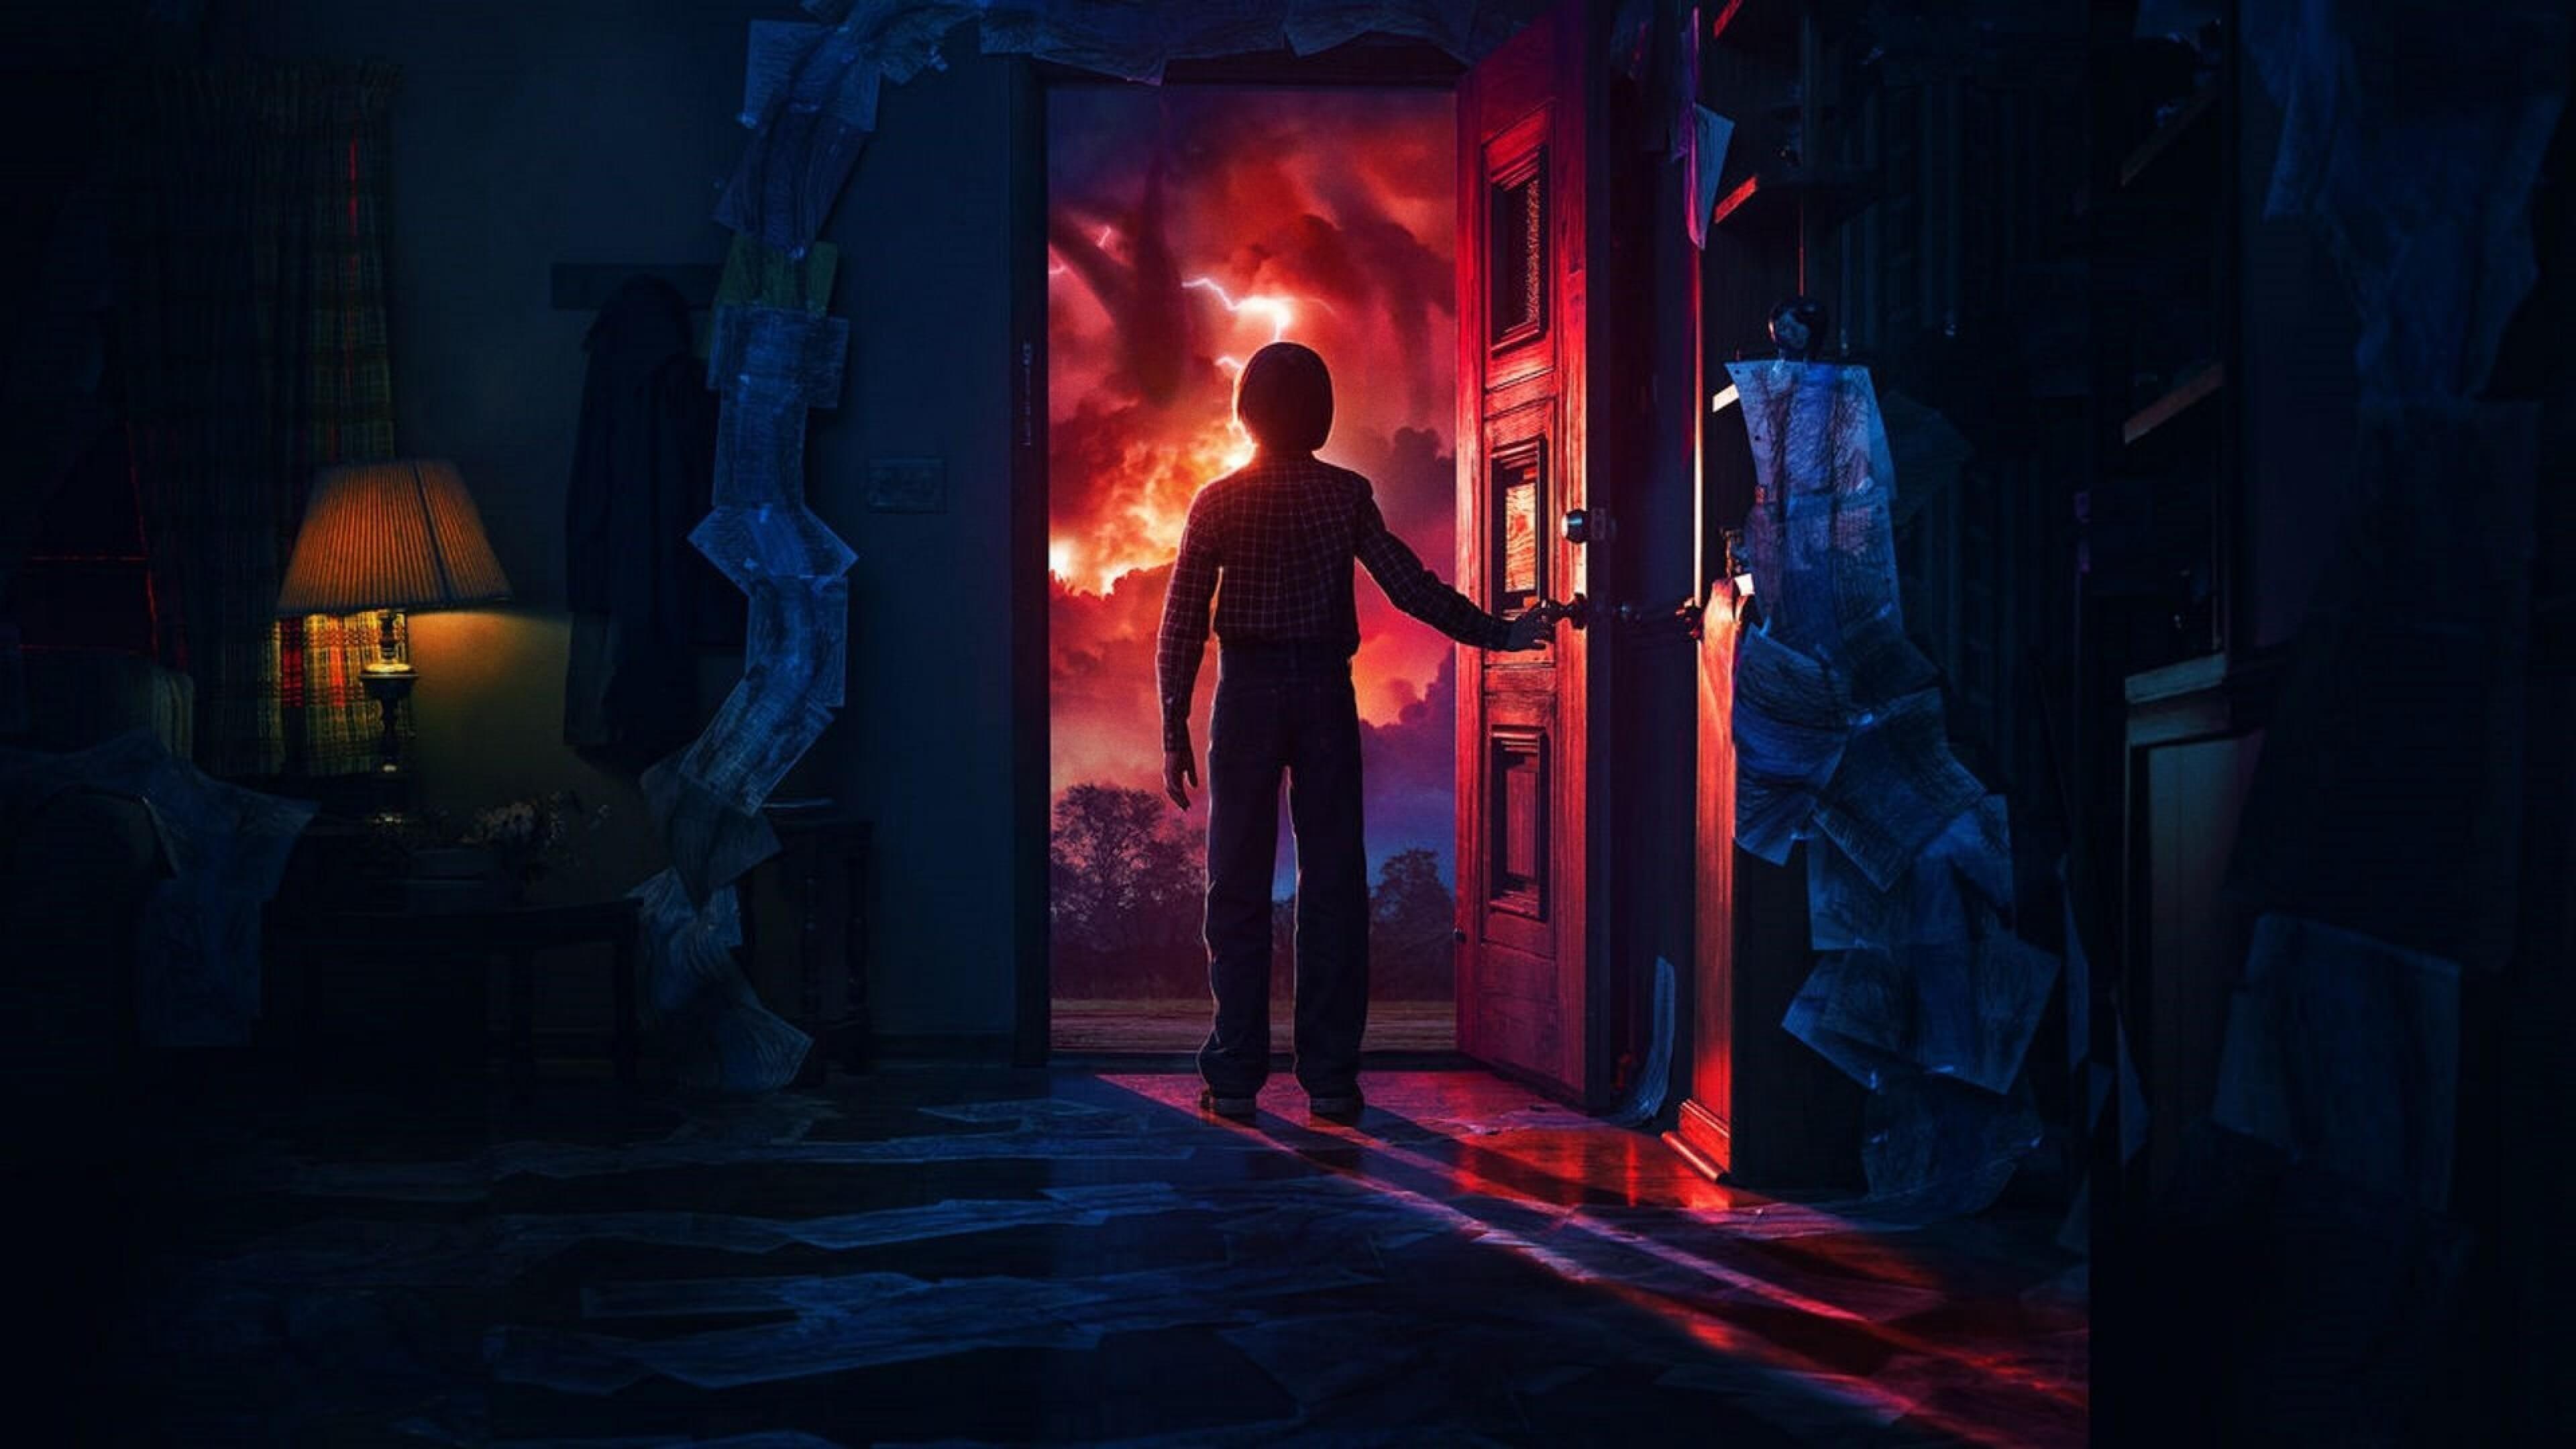 Free Stranger Things Wallpaper for iPhone 4K HD in 2019